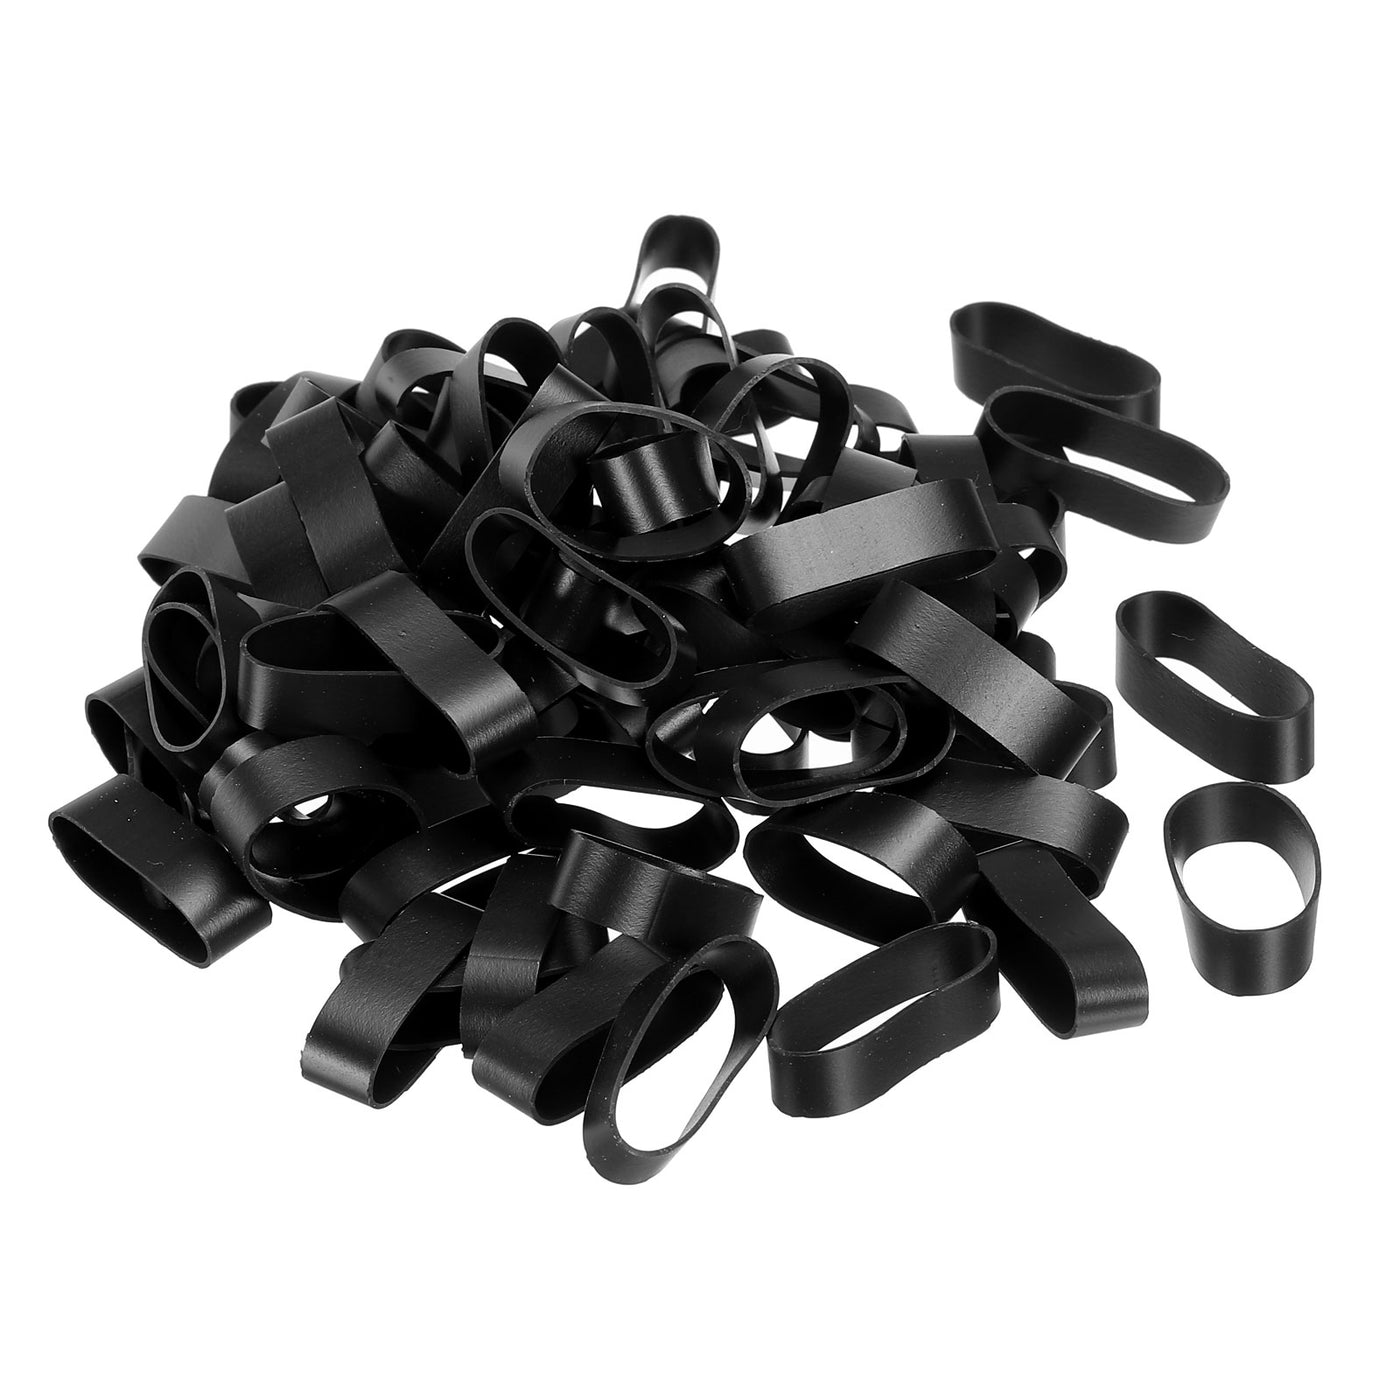 Harfington Silicone Rubber Bands Rings 100pcs Non-slip 0.9" Flat Black for Books, Art, Boxes, Cord Wrapping, Bag Wraps